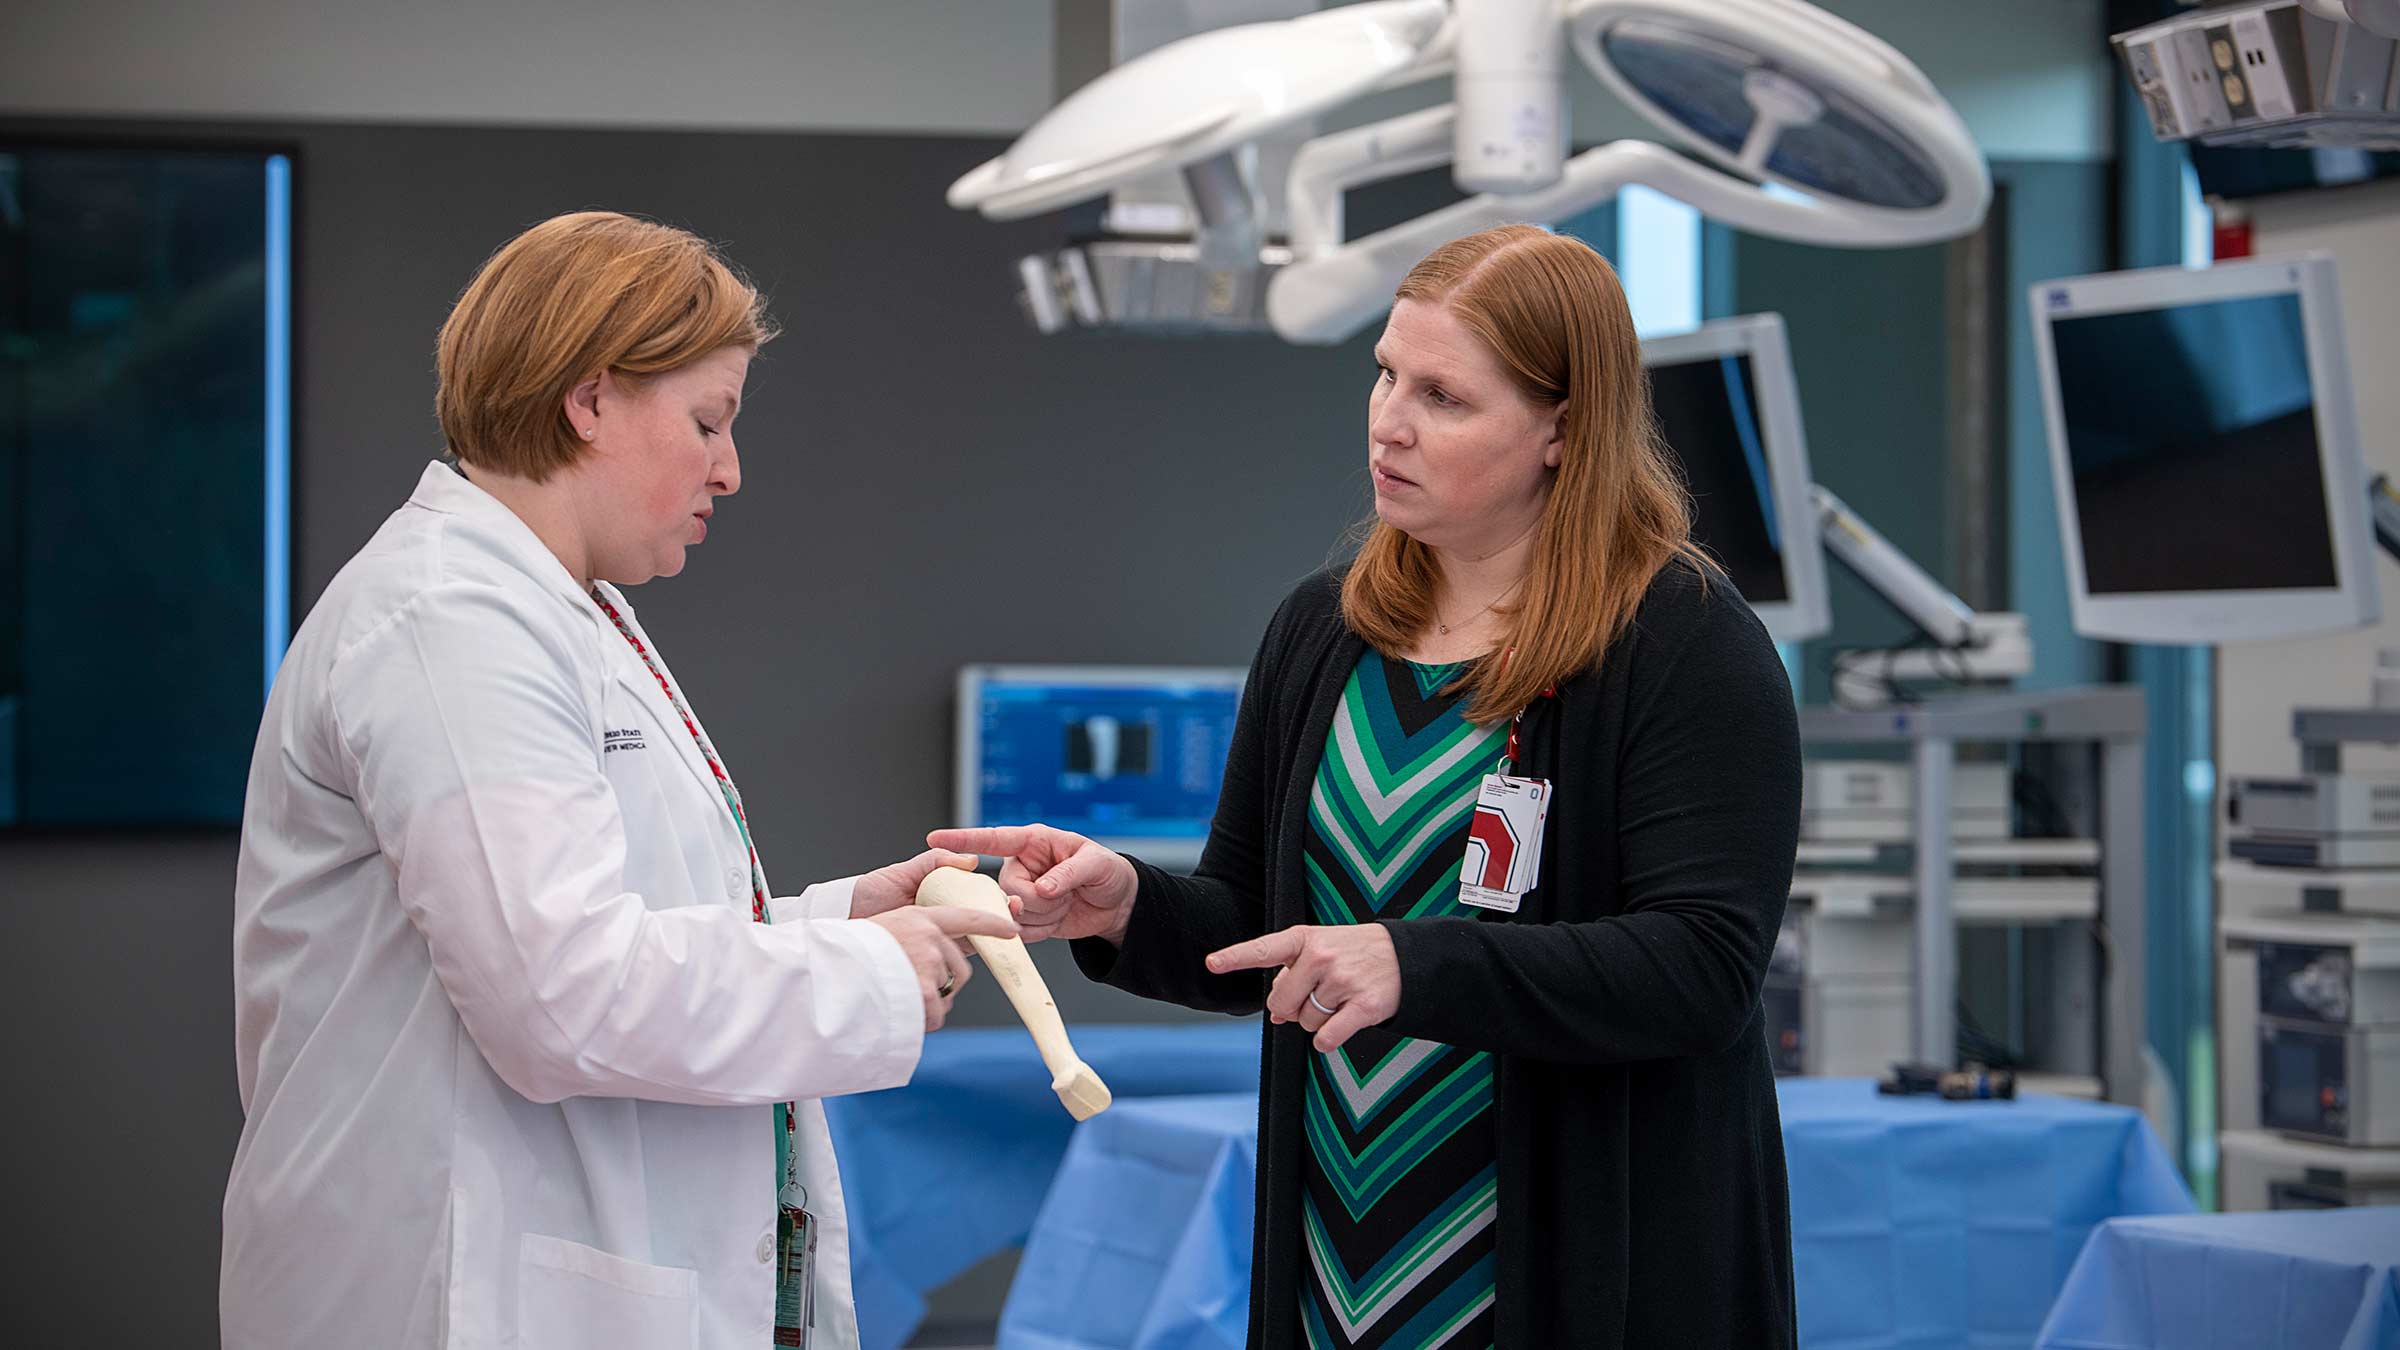 Carmen Quatman, MD, PhD, and Katie Quatman-Yates, DPT, PhD say their work overlaps frequently on the campus of the Ohio State Wexner Medical Center.